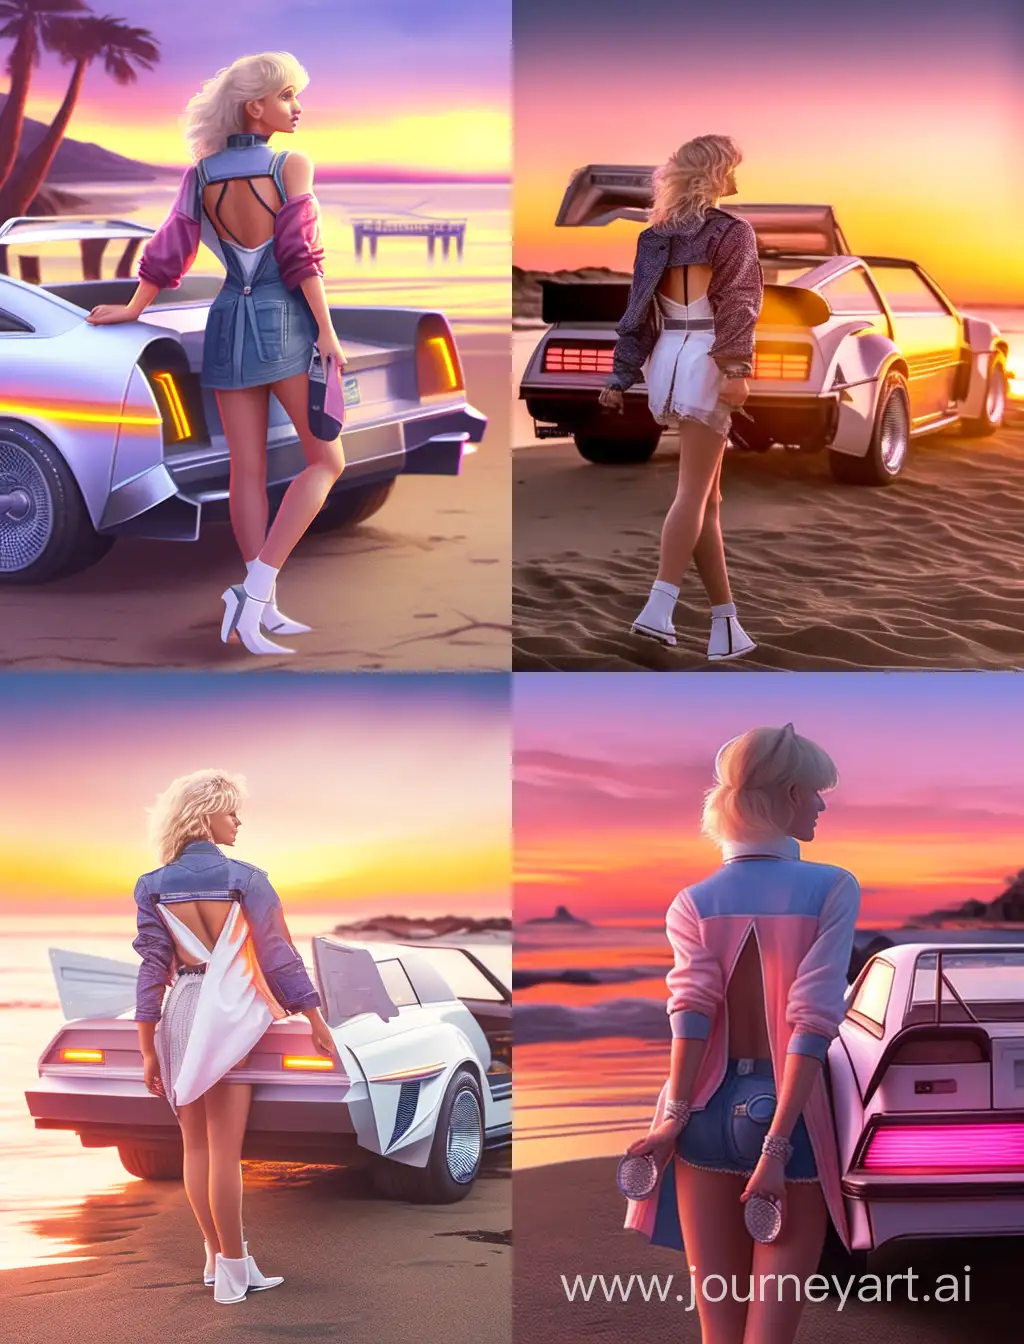 Blonde Brittany Snow in a bikini posing with the Back to the Future delorean on a beach at sunset.